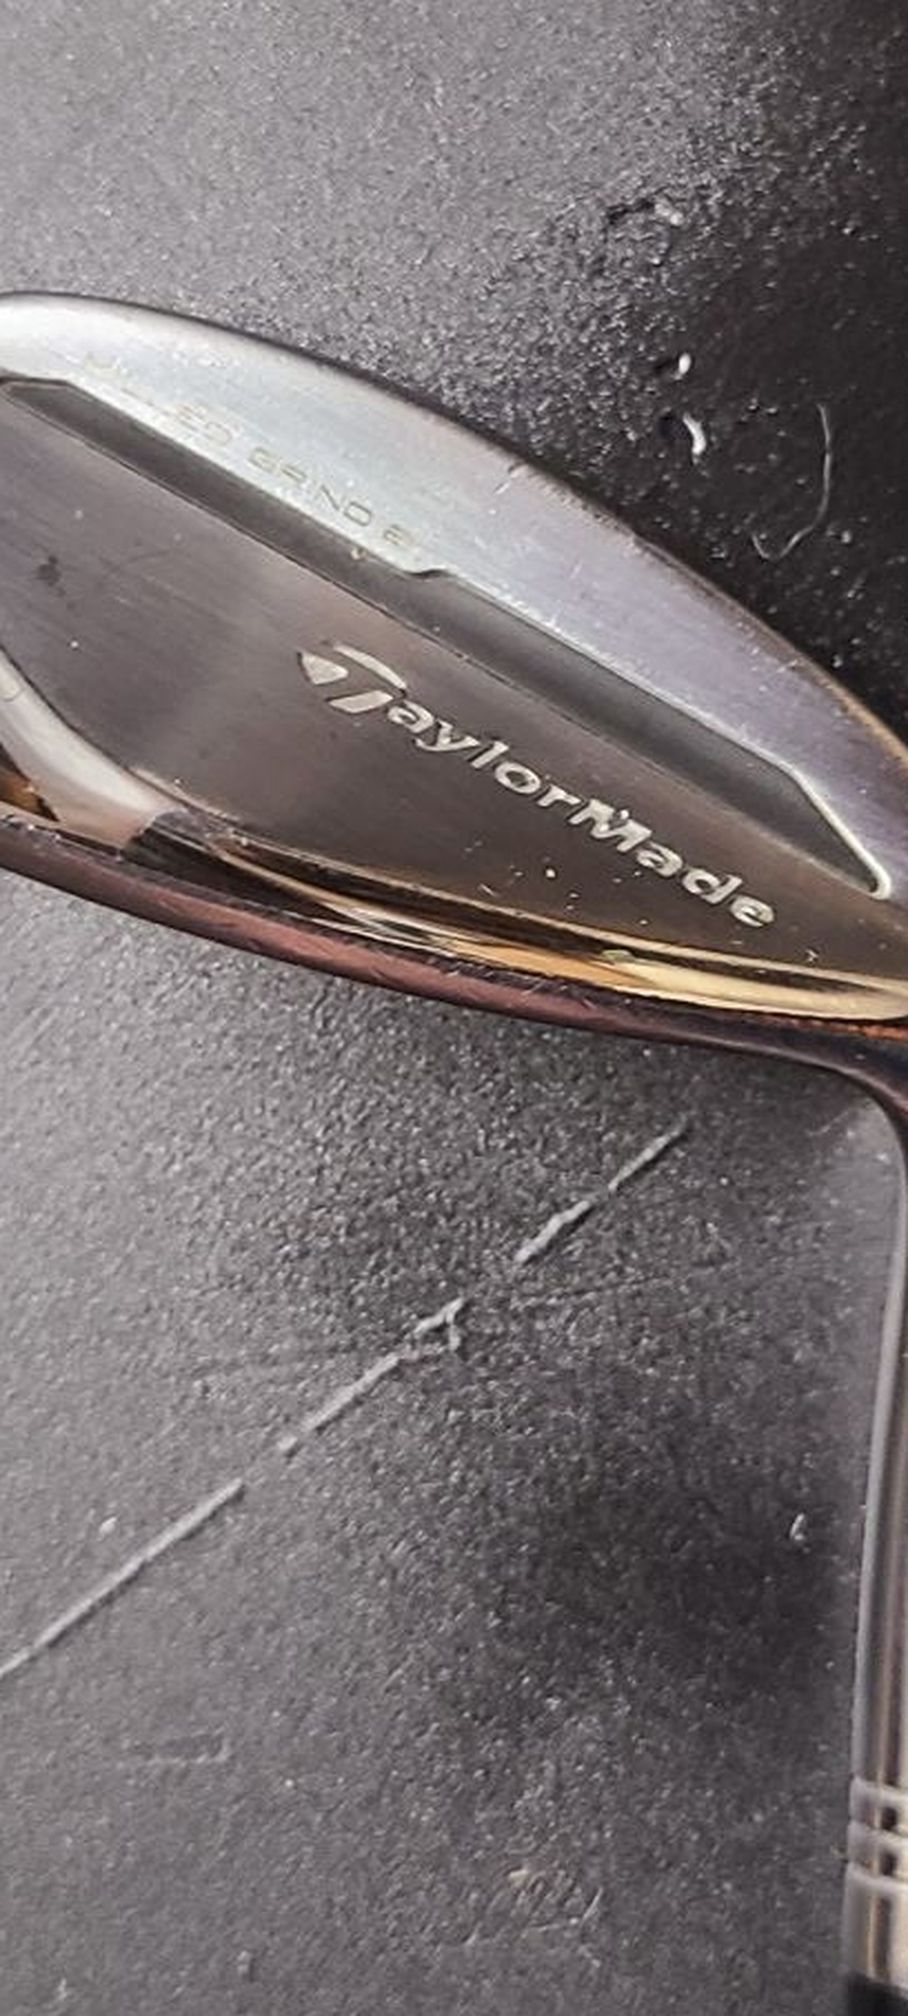 Taylormade milled grind 2